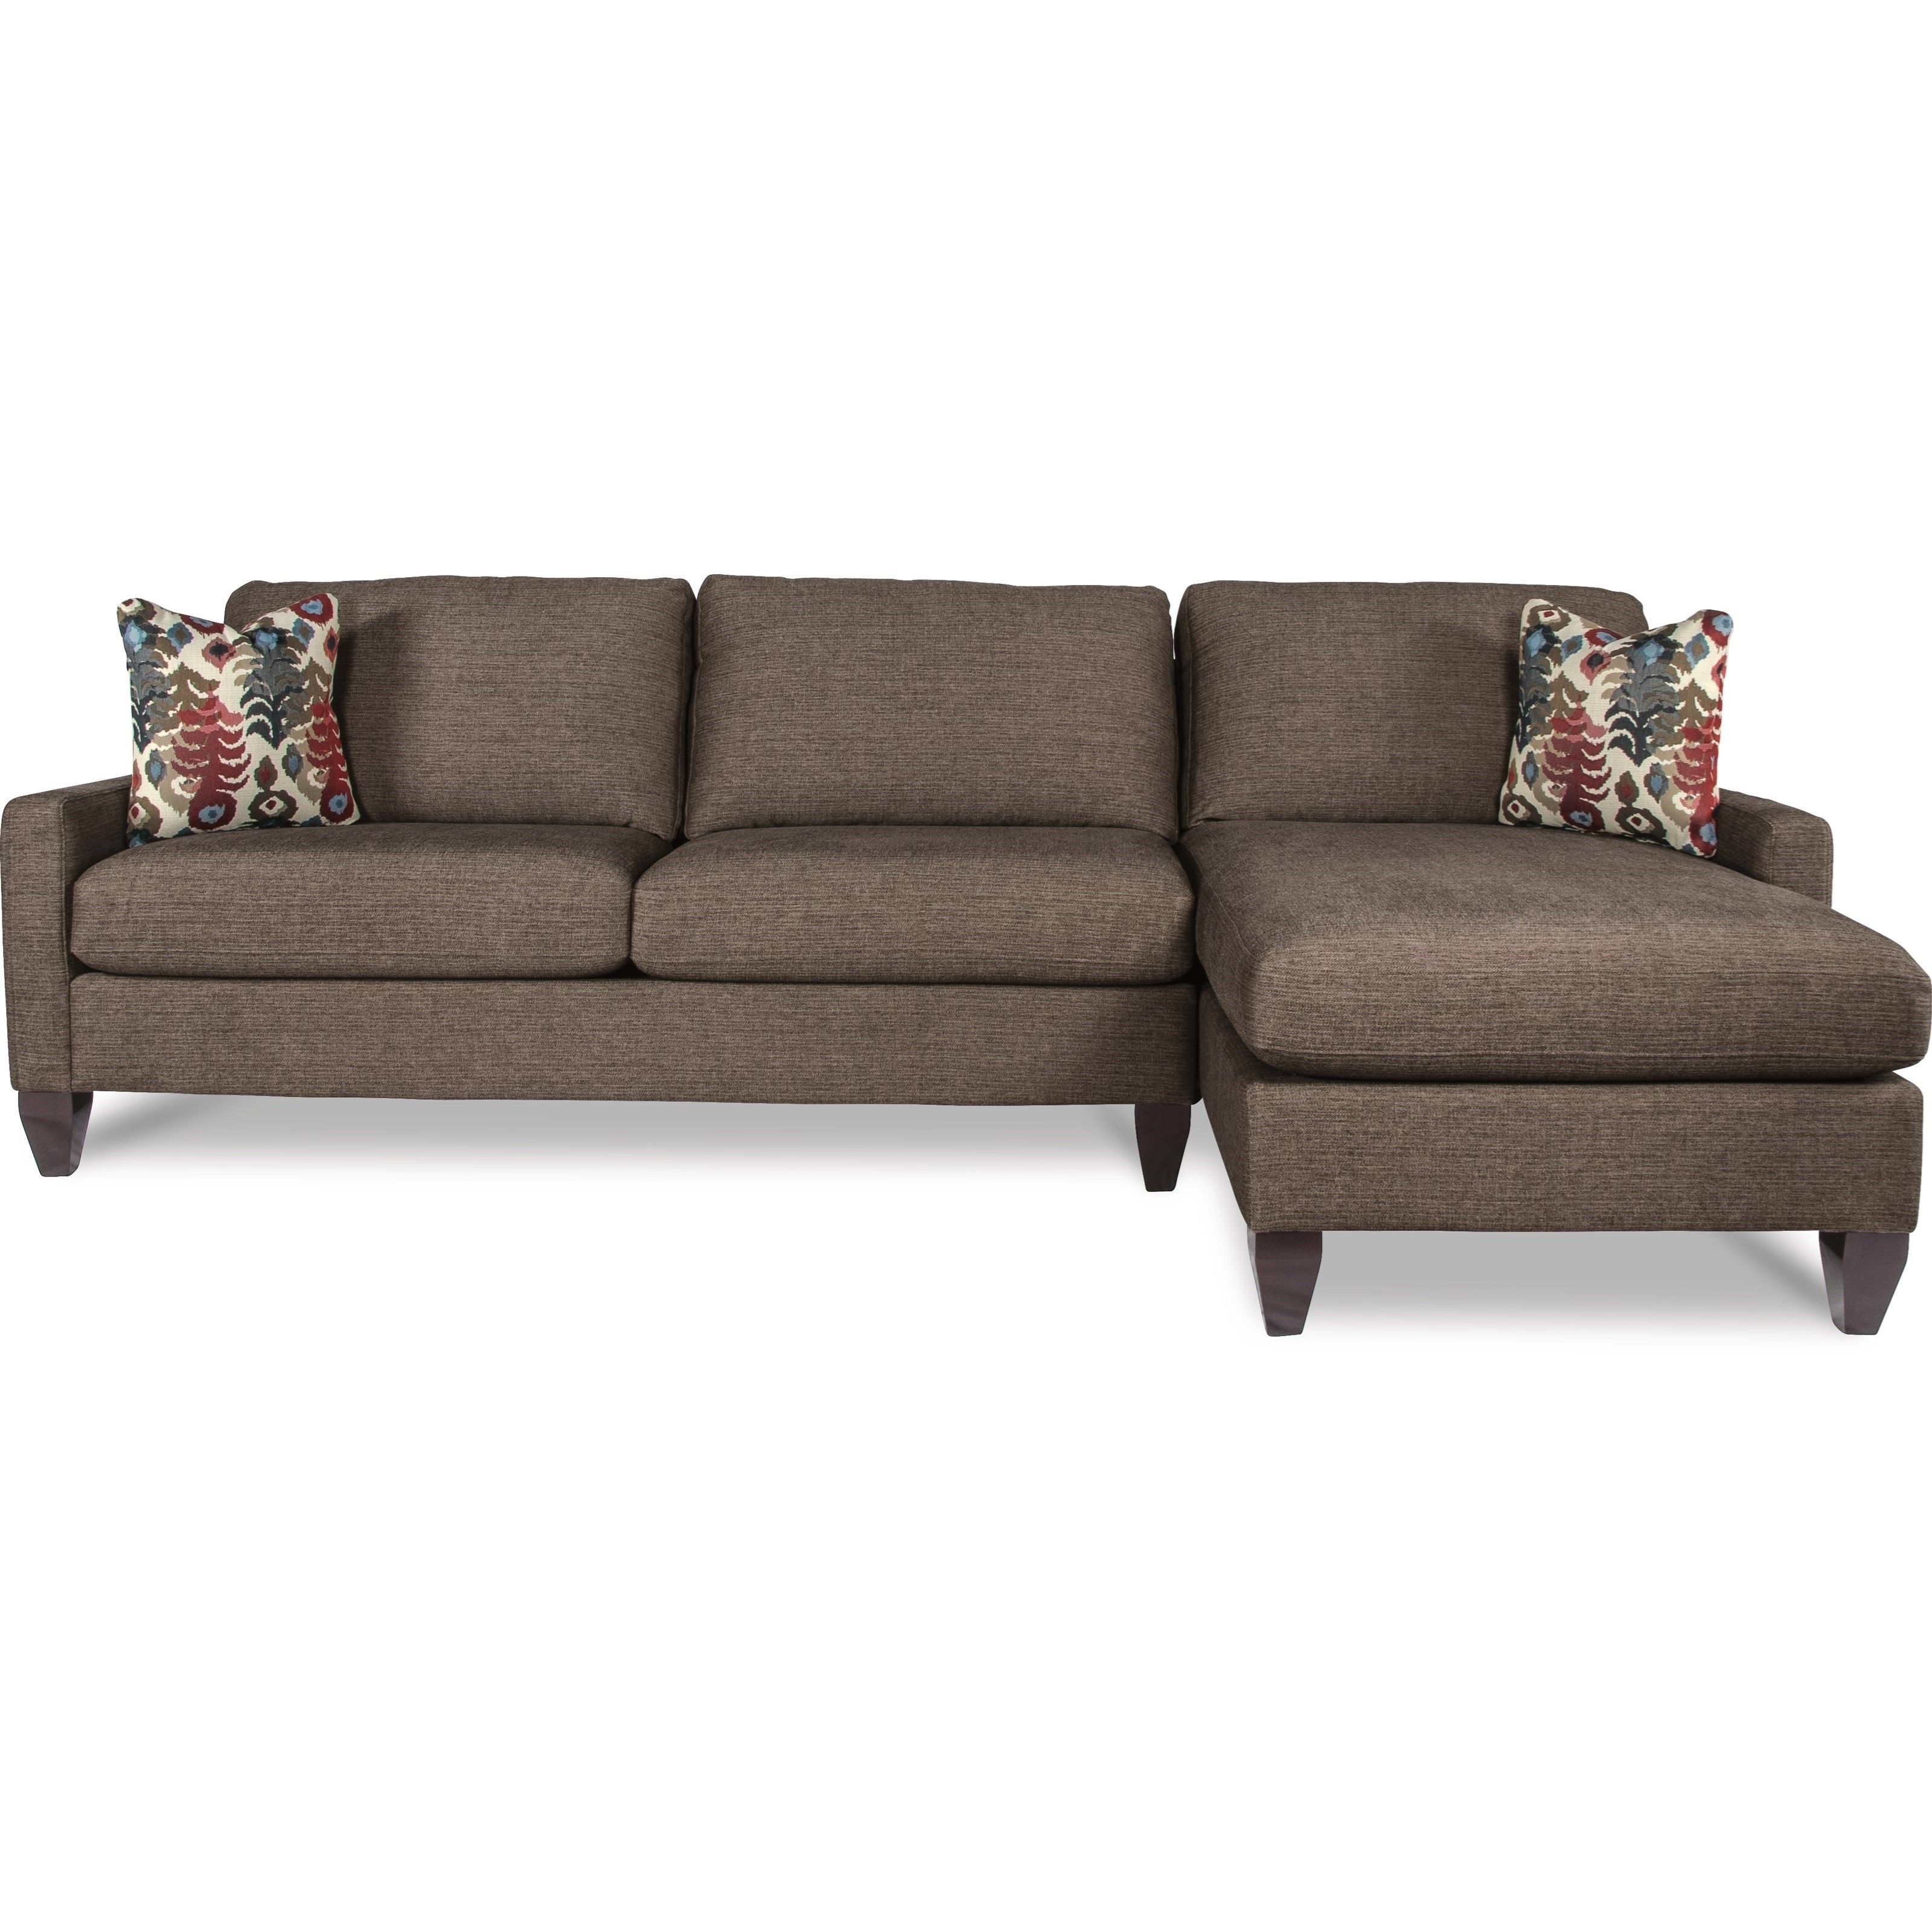 Raf Chaise Laf Sofa | Baci Living Room For Mcdade Graphite 2 Piece Sectionals With Laf Chaise (View 15 of 25)